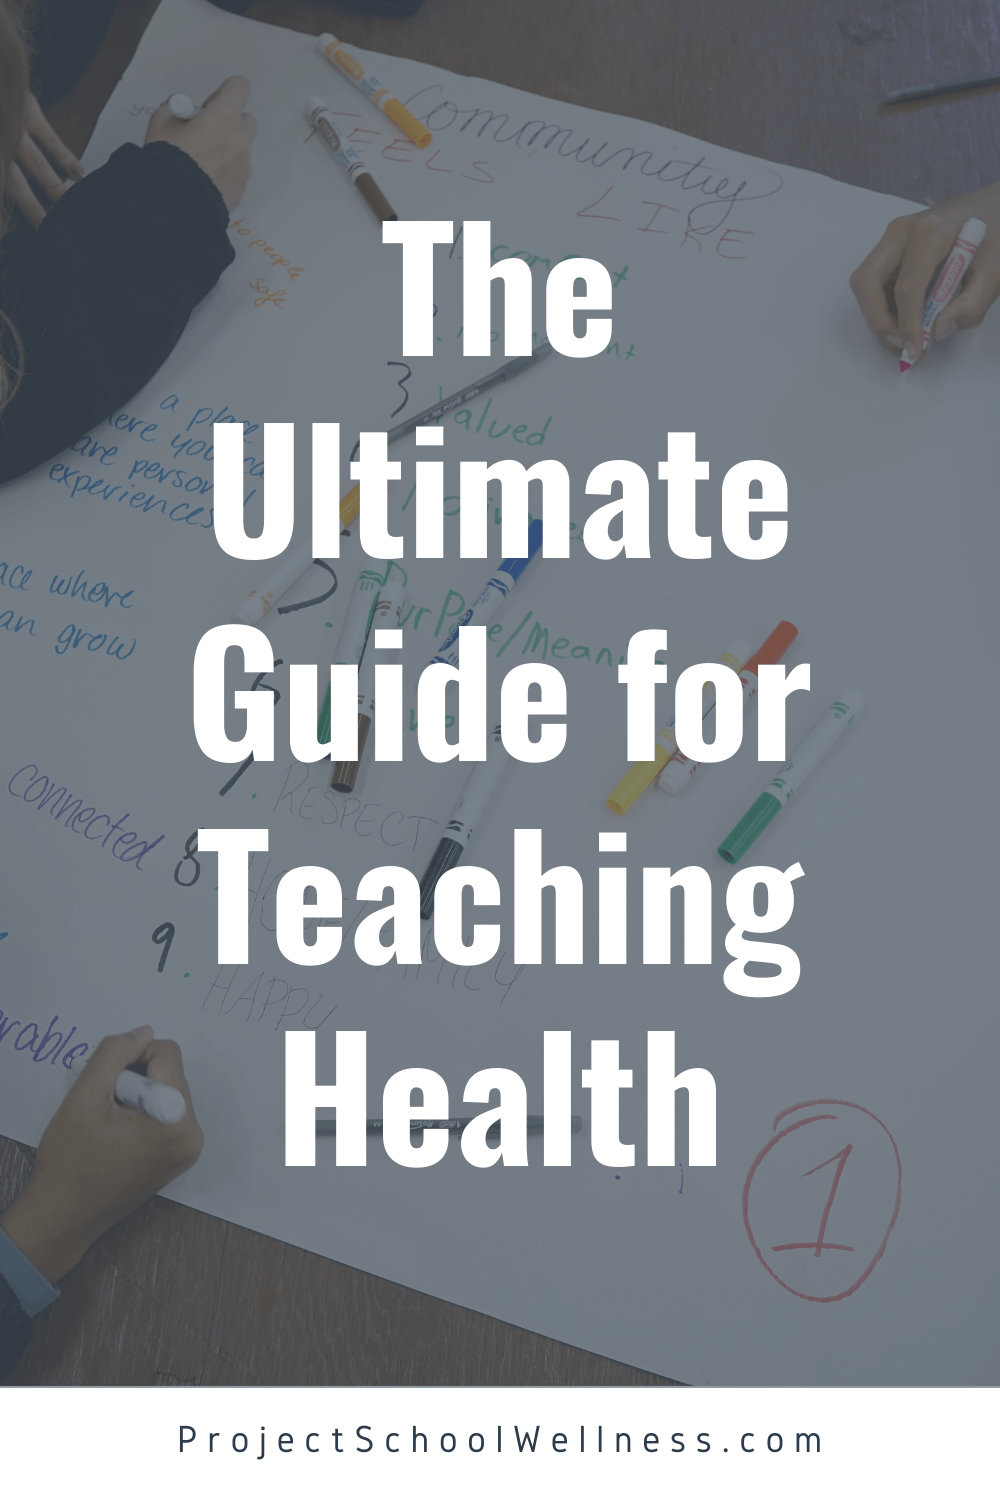 The Ultimate Guide for Teaching Health, everything you need to know about teaching comprehension, skills-based health education. - A Project School Wellness skills-based health resources. Download free advocacy lesson plans, a skills-based health lesson planning template, and health education scope and sequence template